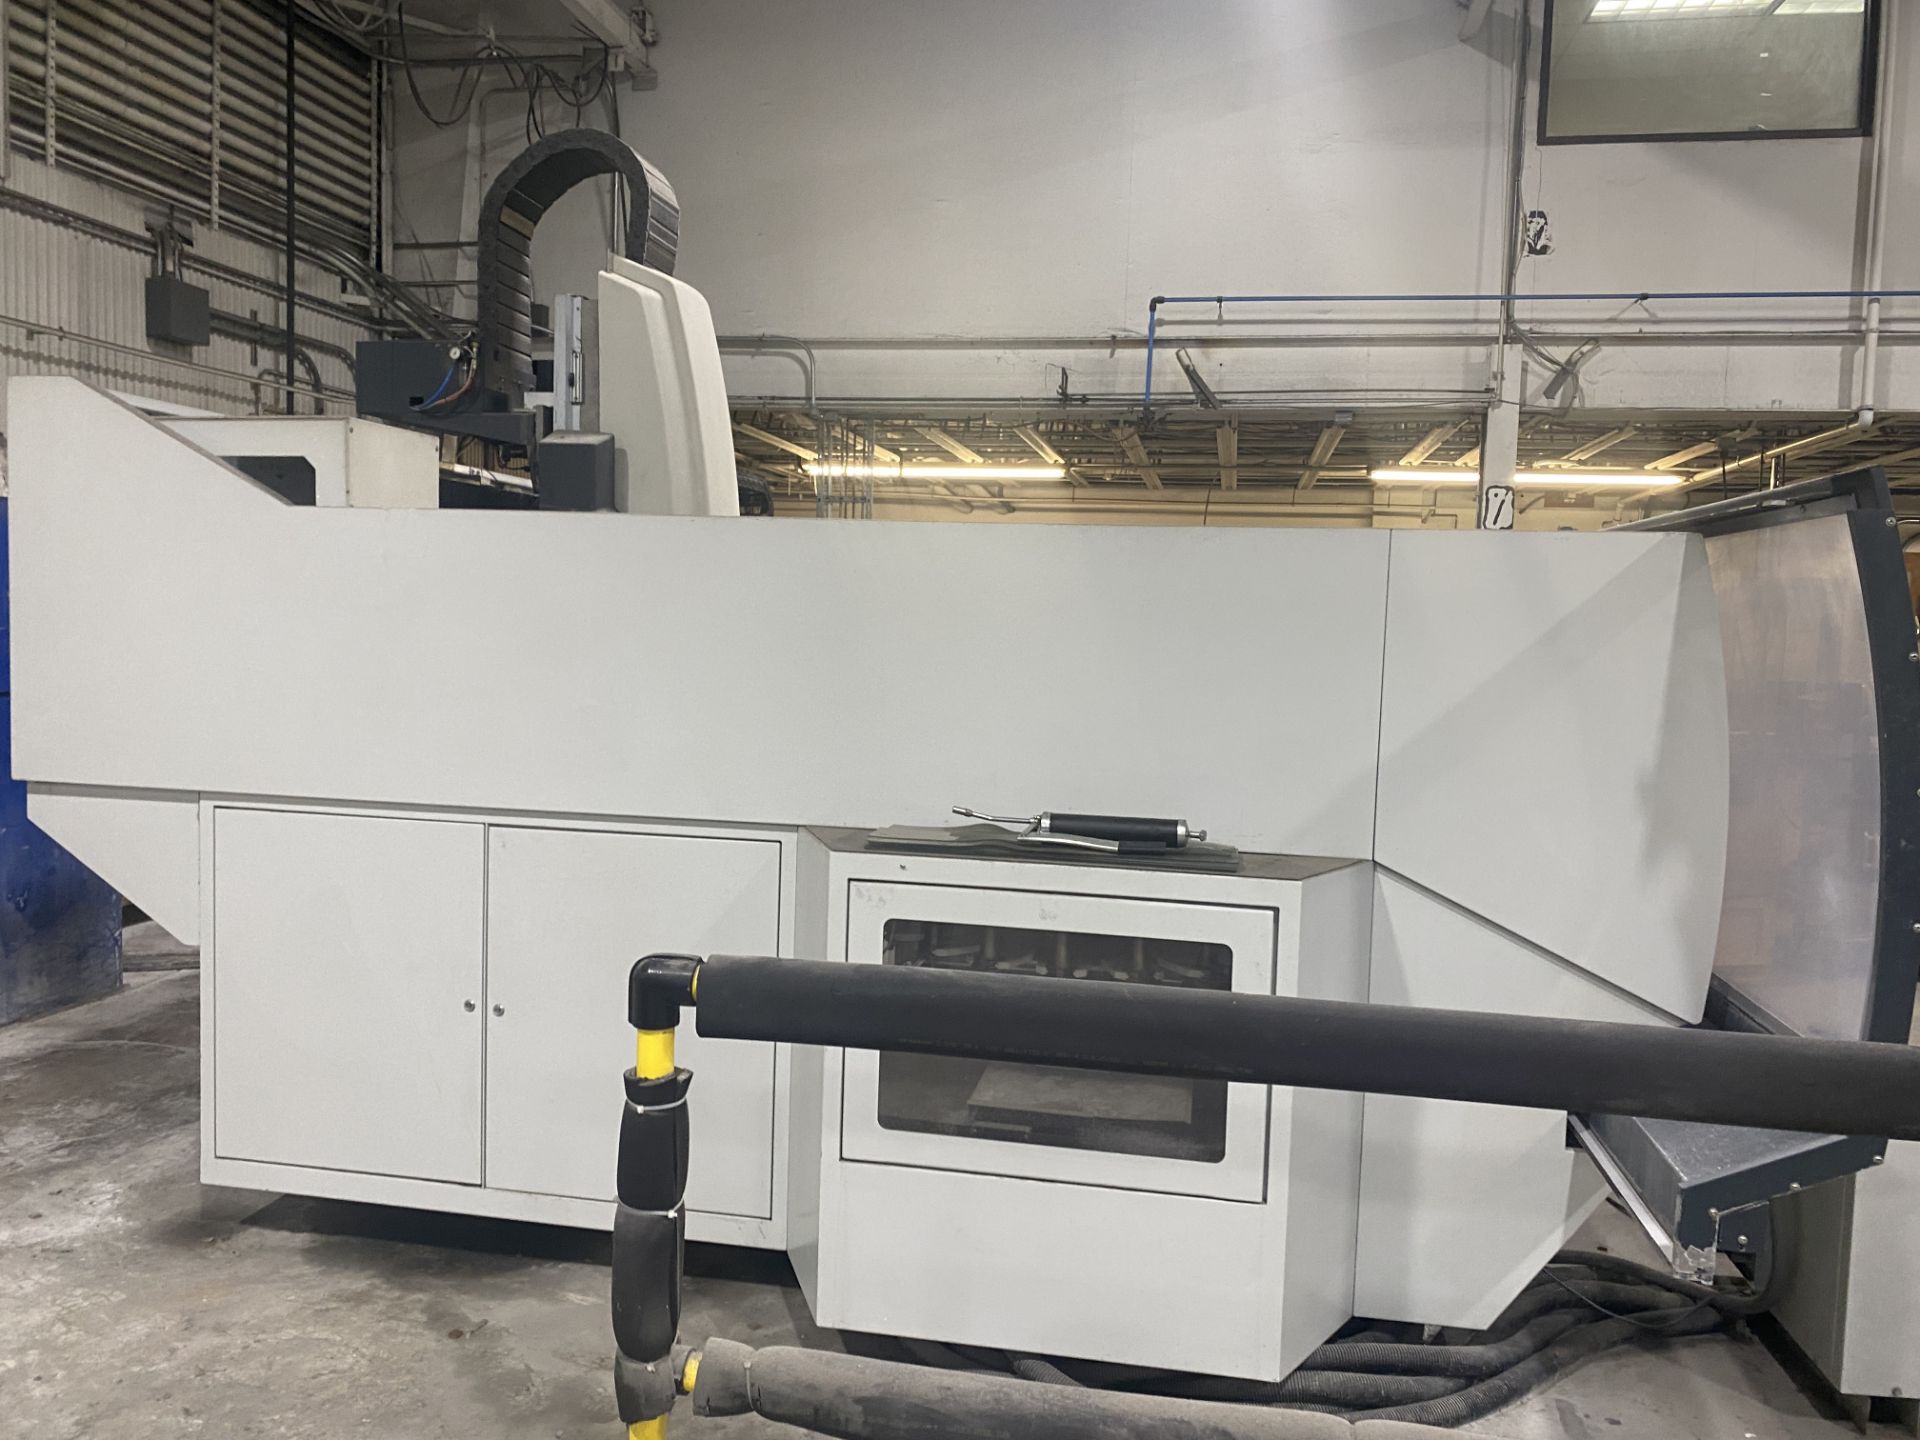 2016 Intermac Model Master 43 CNC Glass Machining Center, Table Size 90” x 160” 4060mm x 2300mm, - Image 7 of 19